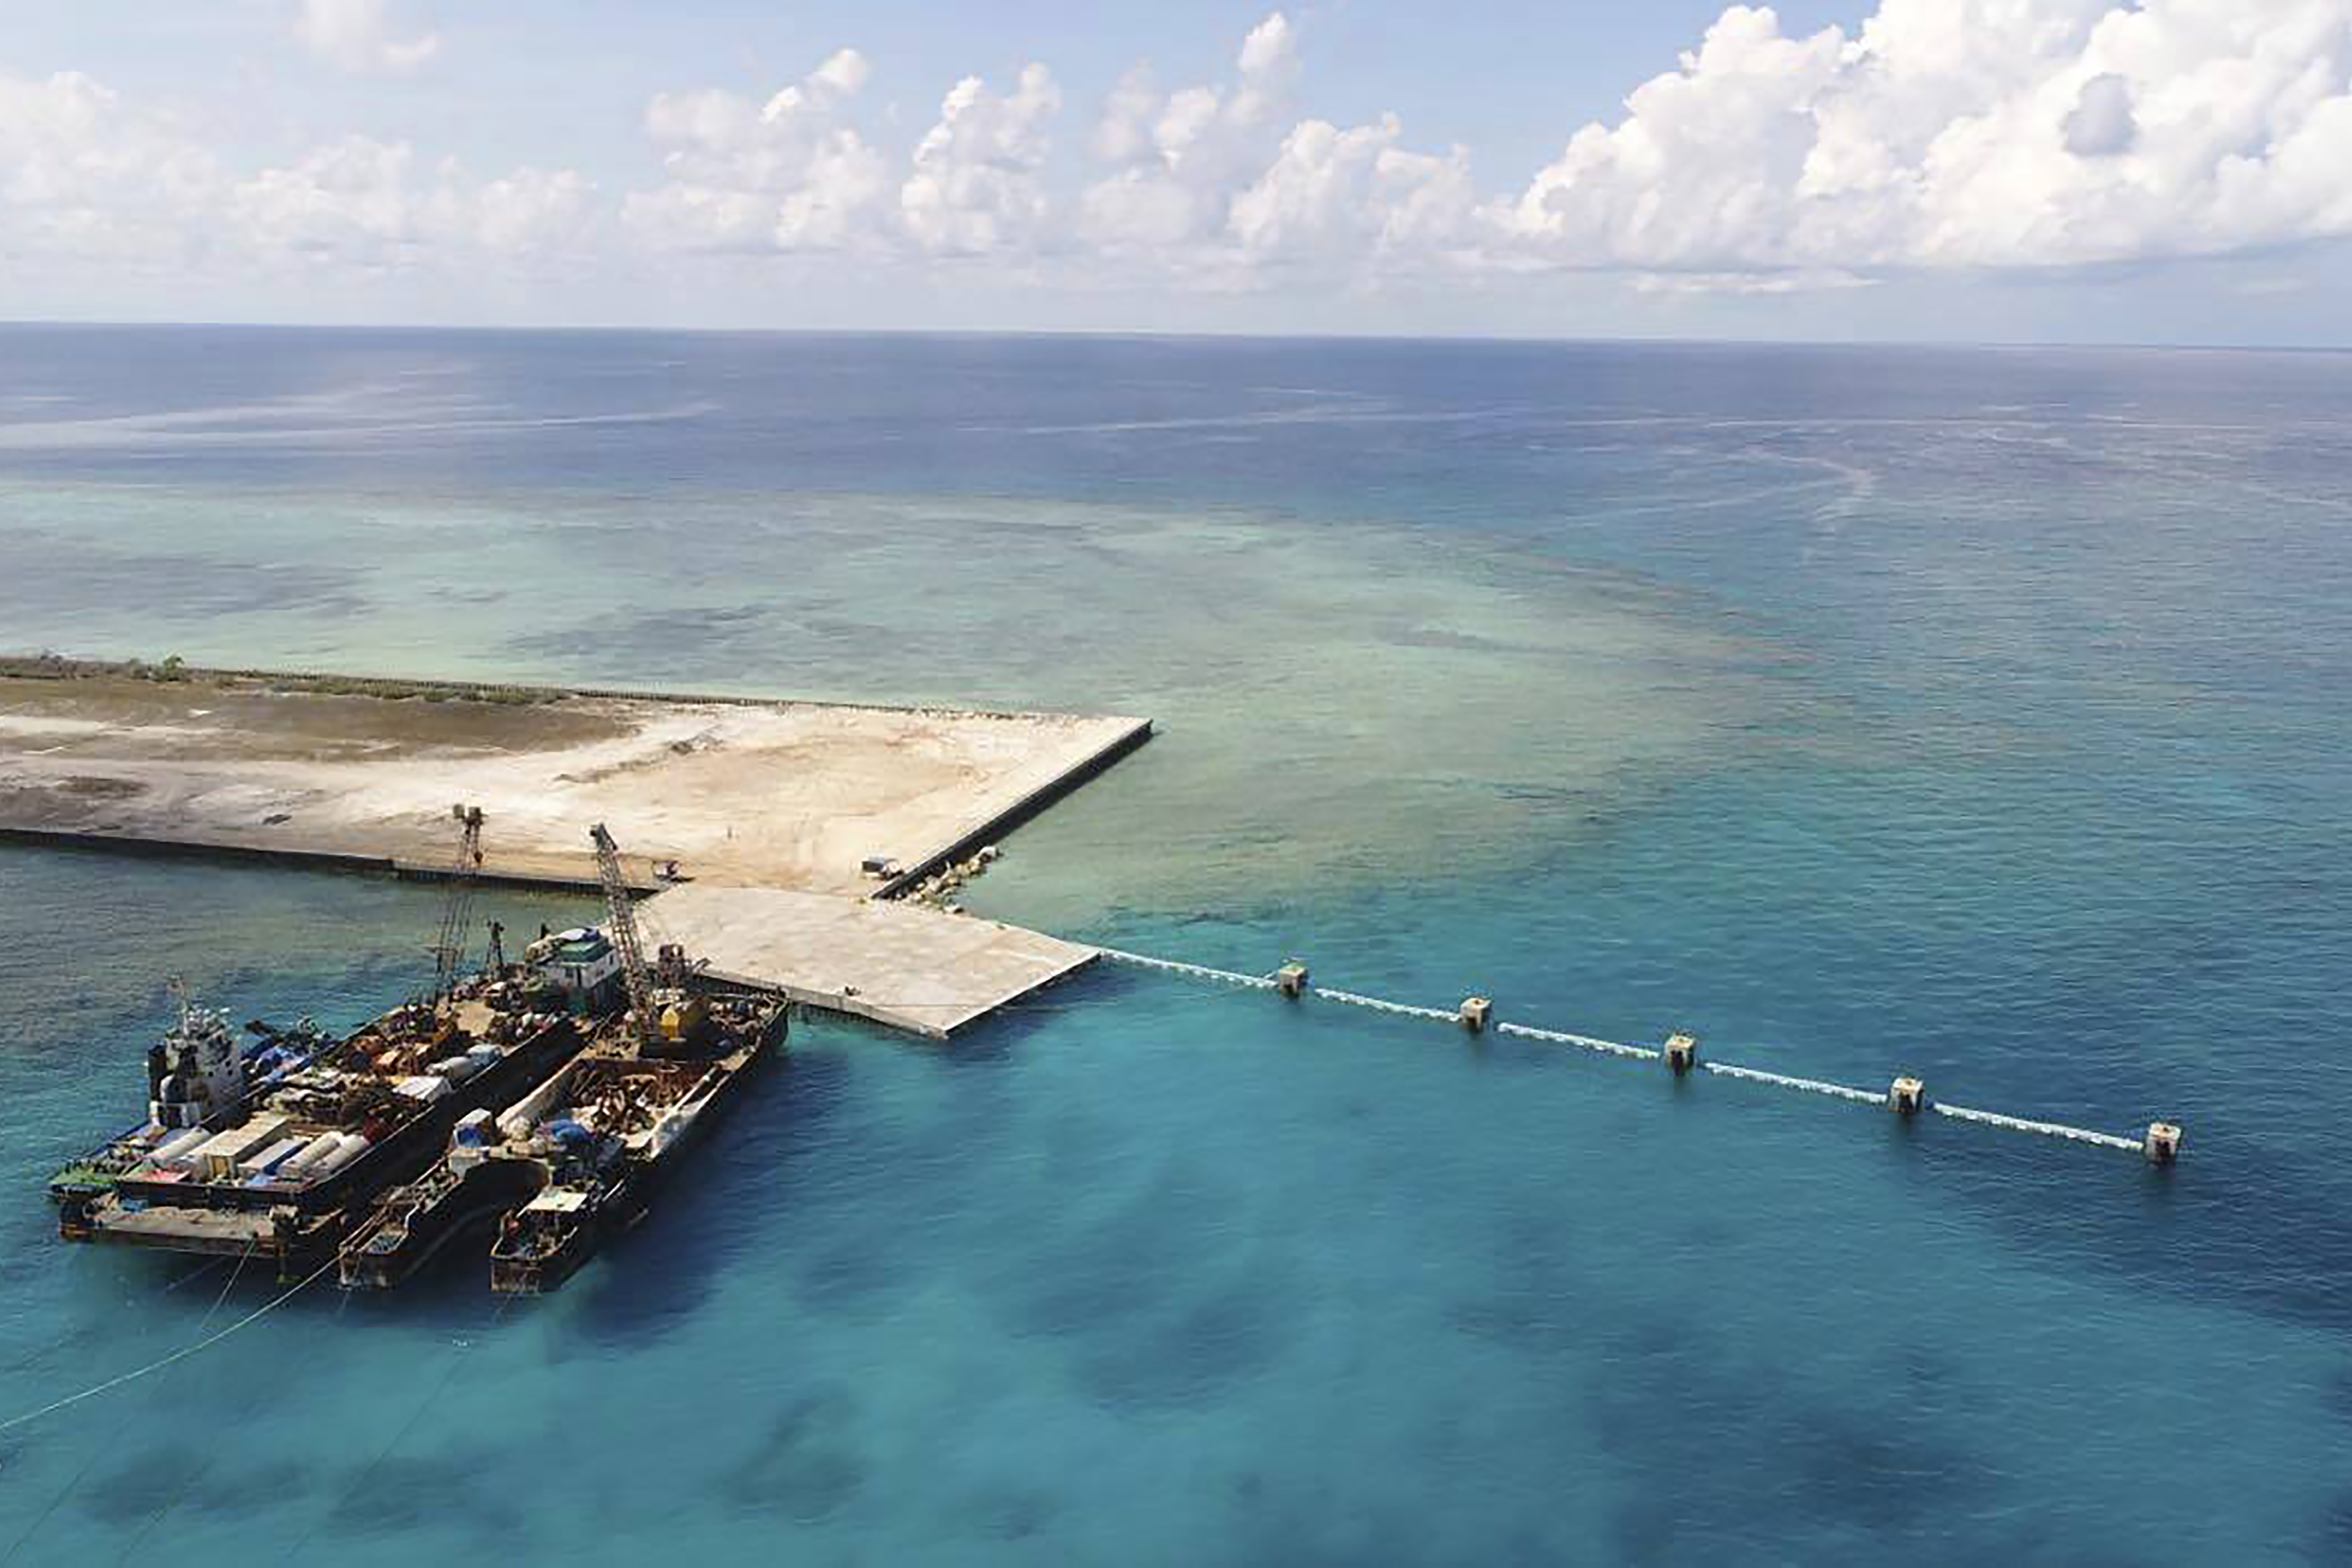 In this photo provided by the Department of National Defense, ships carrying construction materials are docked at the newly built beach ramp at the Philippine-claimed island of Thitu, in the disputed South China Sea, June 9, 2020.